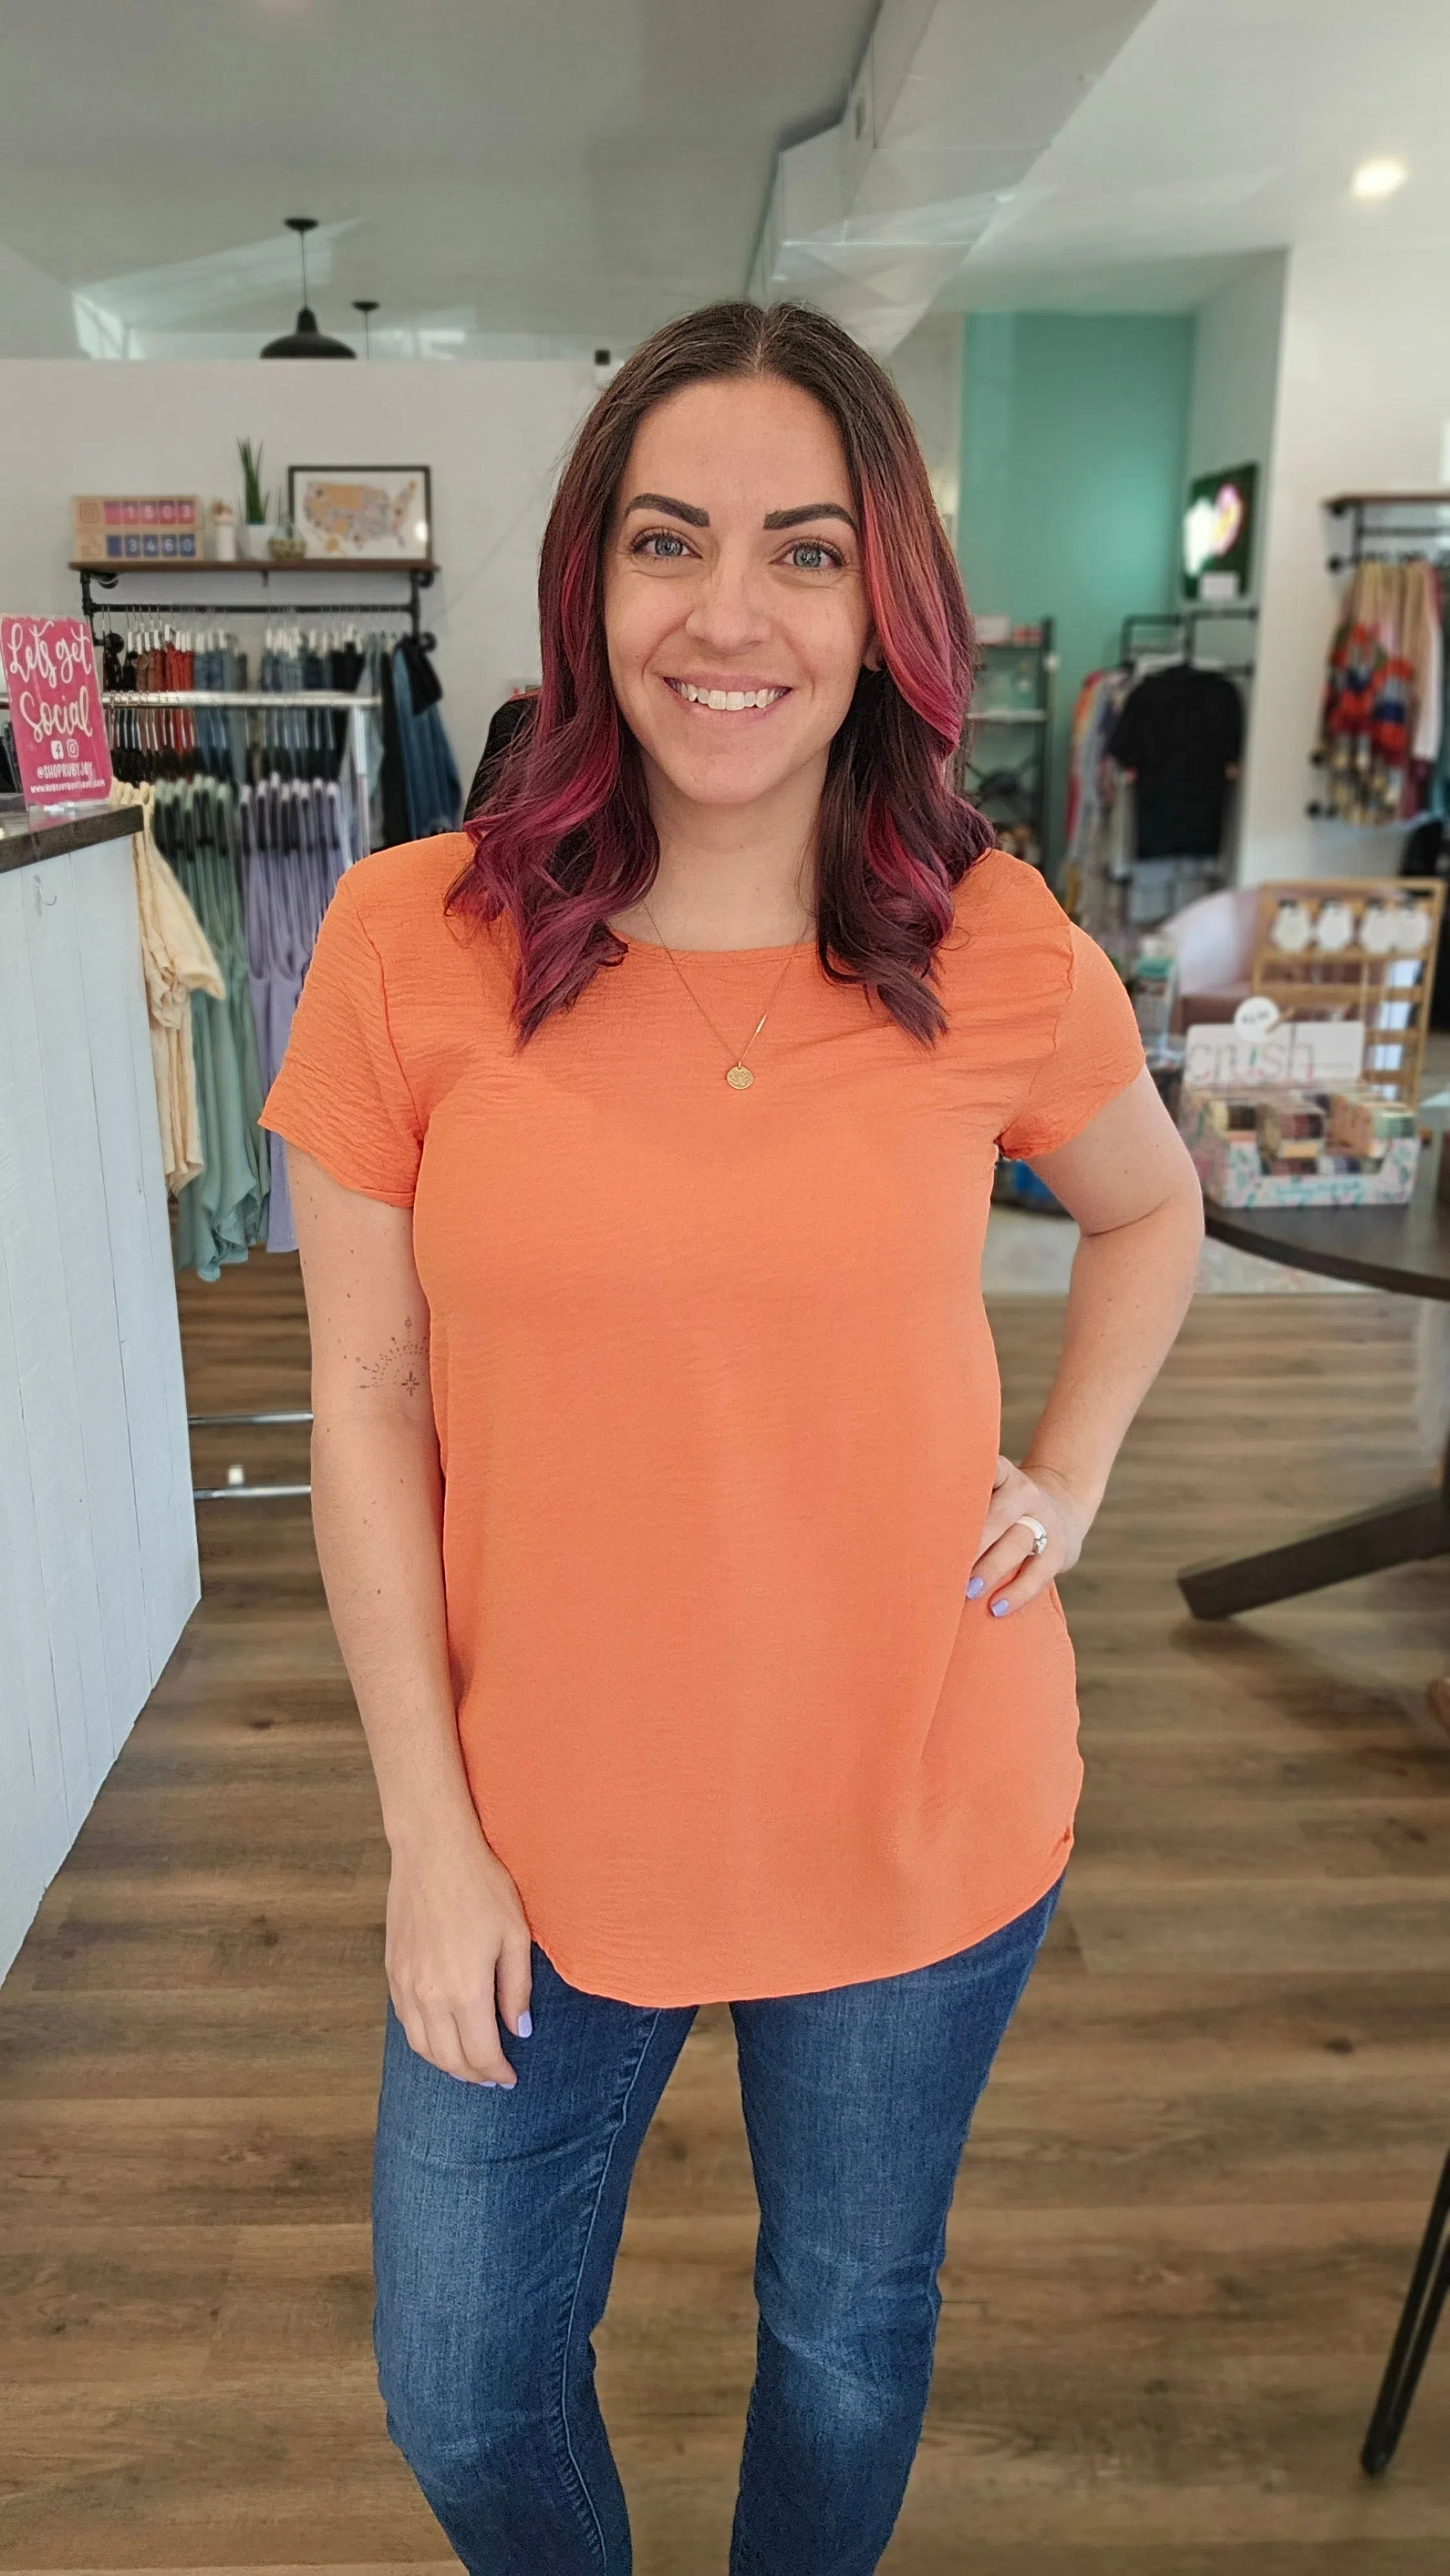 Shop Keri Textured Short Sleeved Top-Blouse at Ruby Joy Boutique, a Women's Clothing Store in Pickerington, Ohio